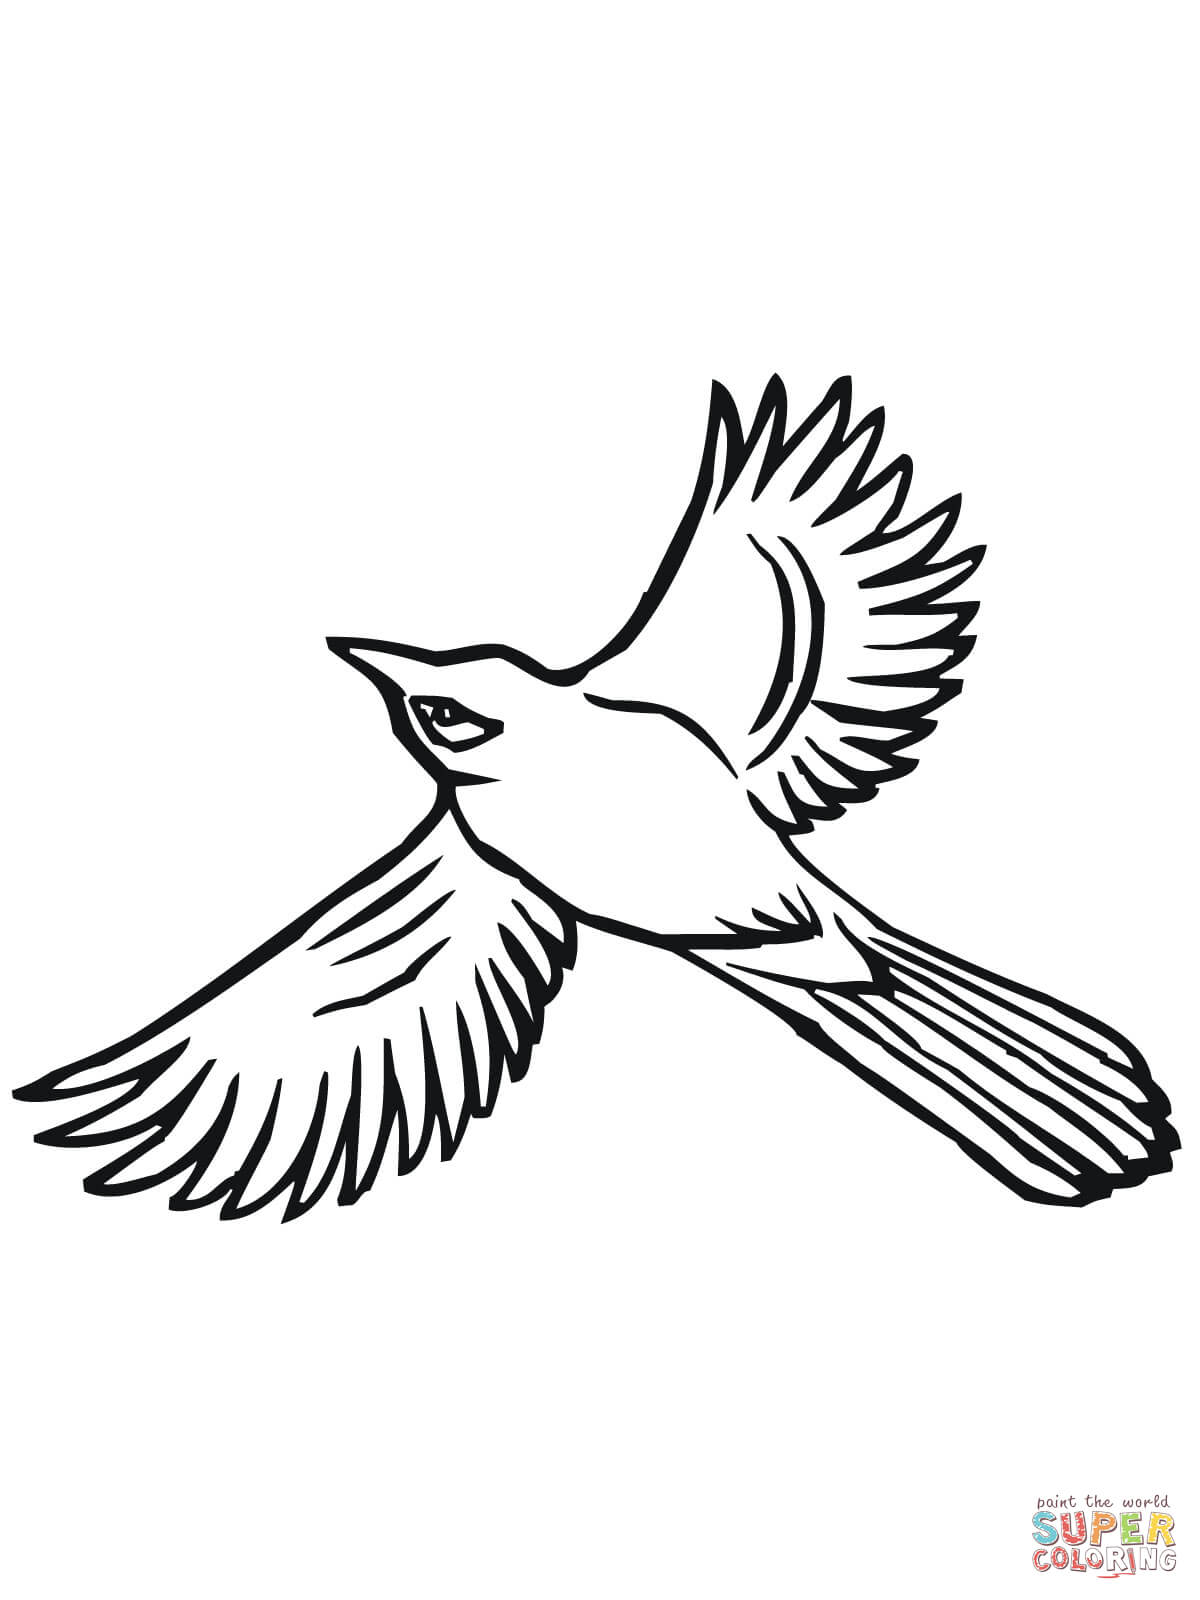 Flying Magpie coloring page | Free Printable Coloring Pages